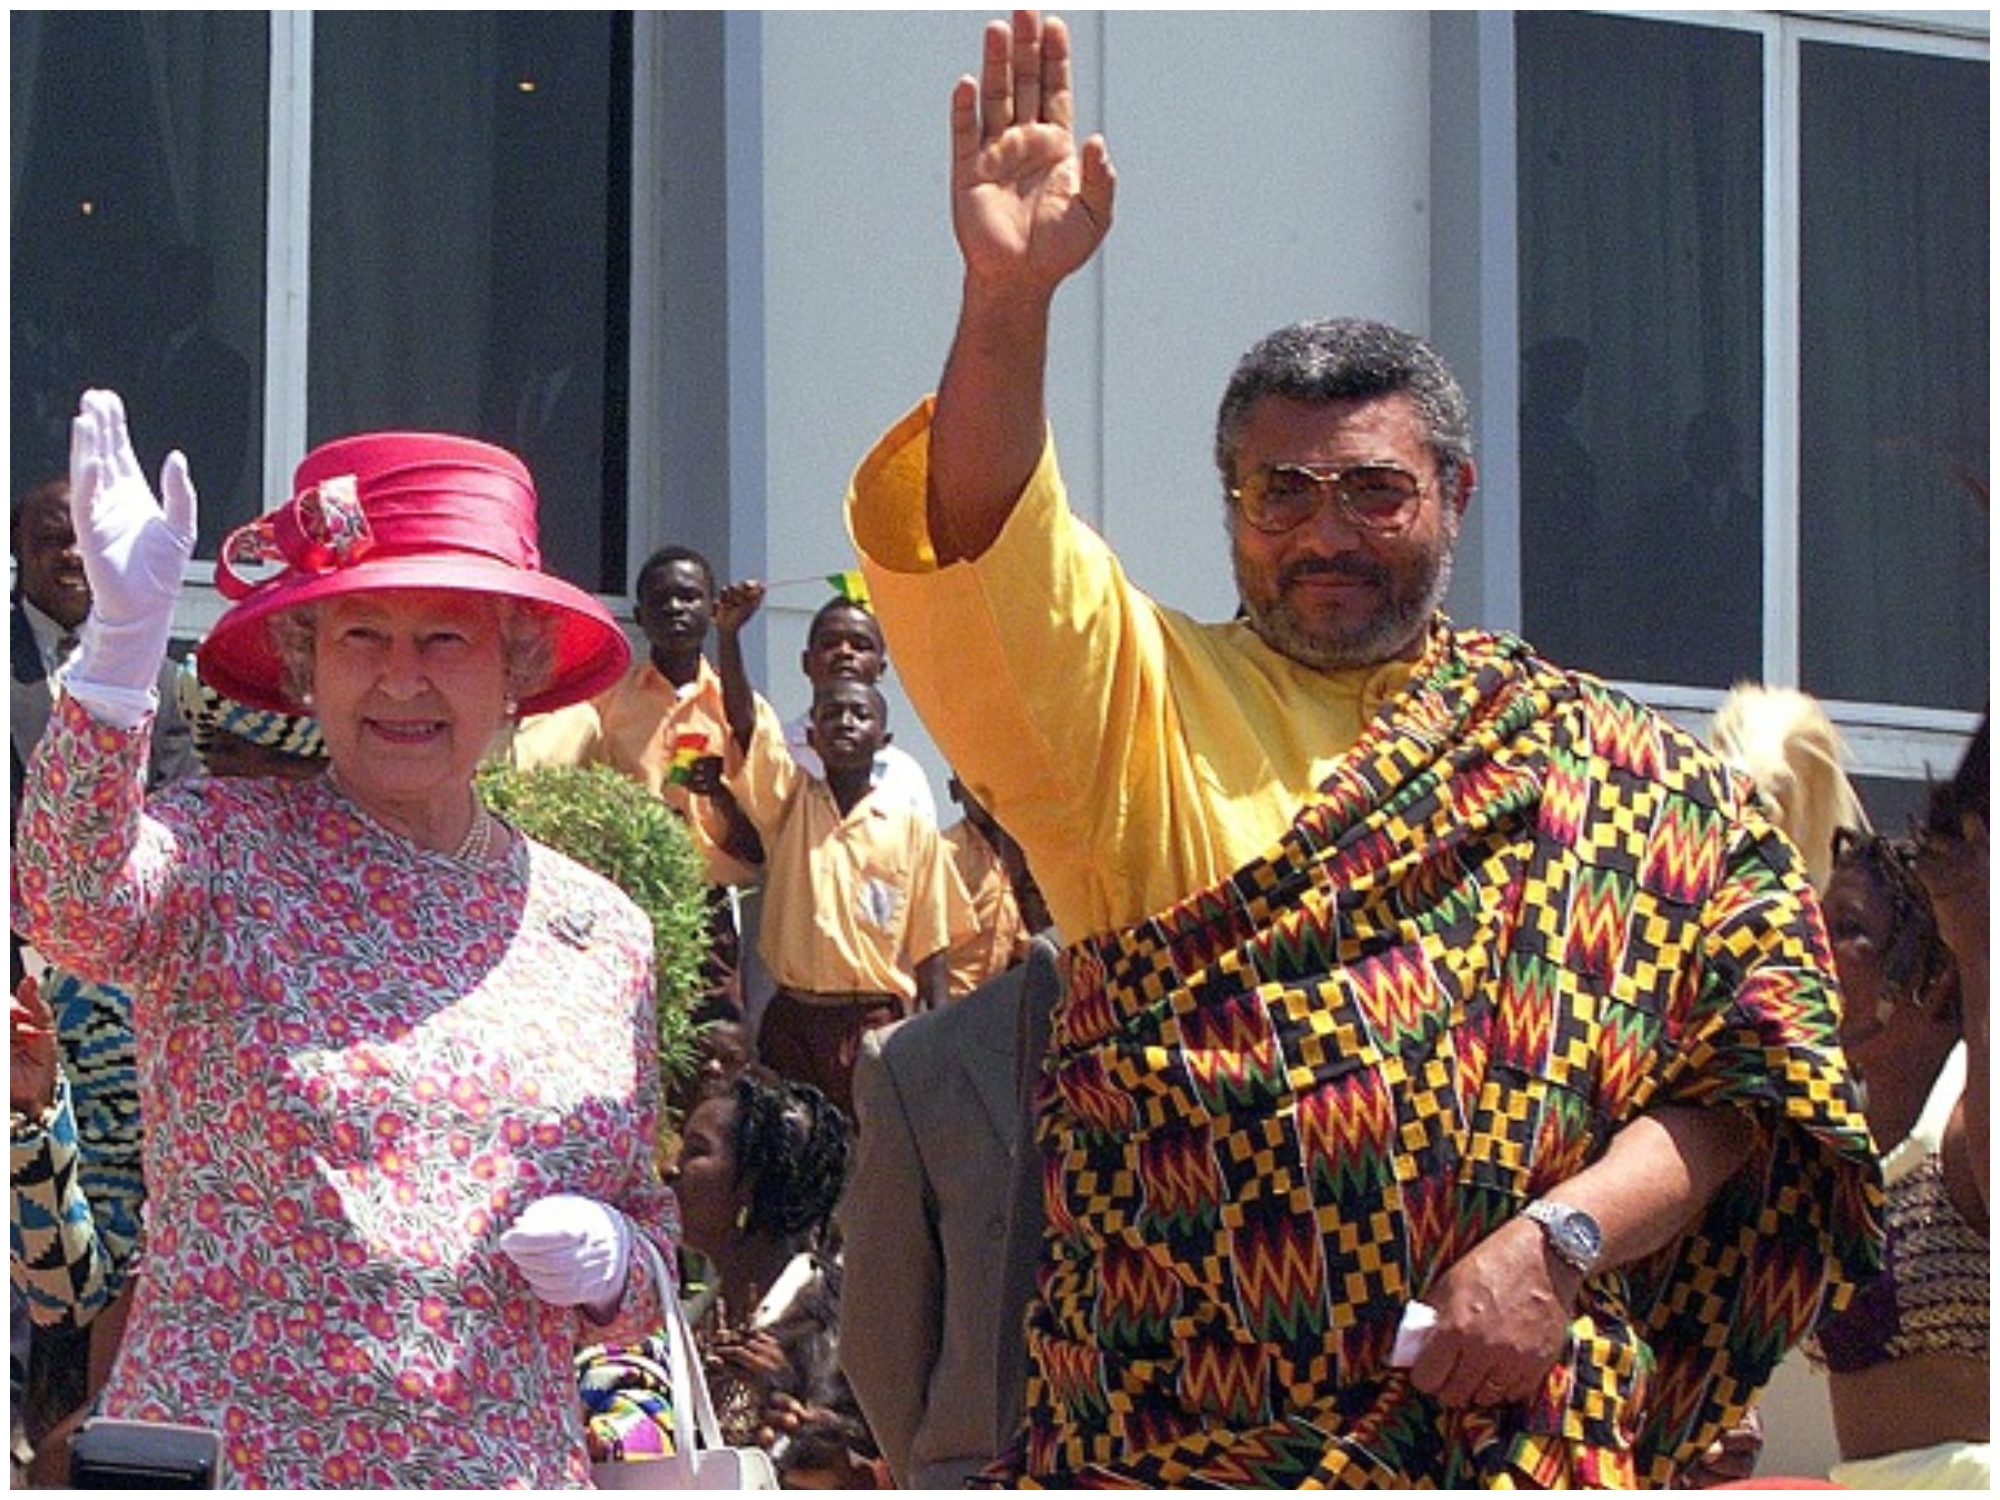 Queen Elizabeth and Rawlings wave shortly after the Queen addresses Parliament.